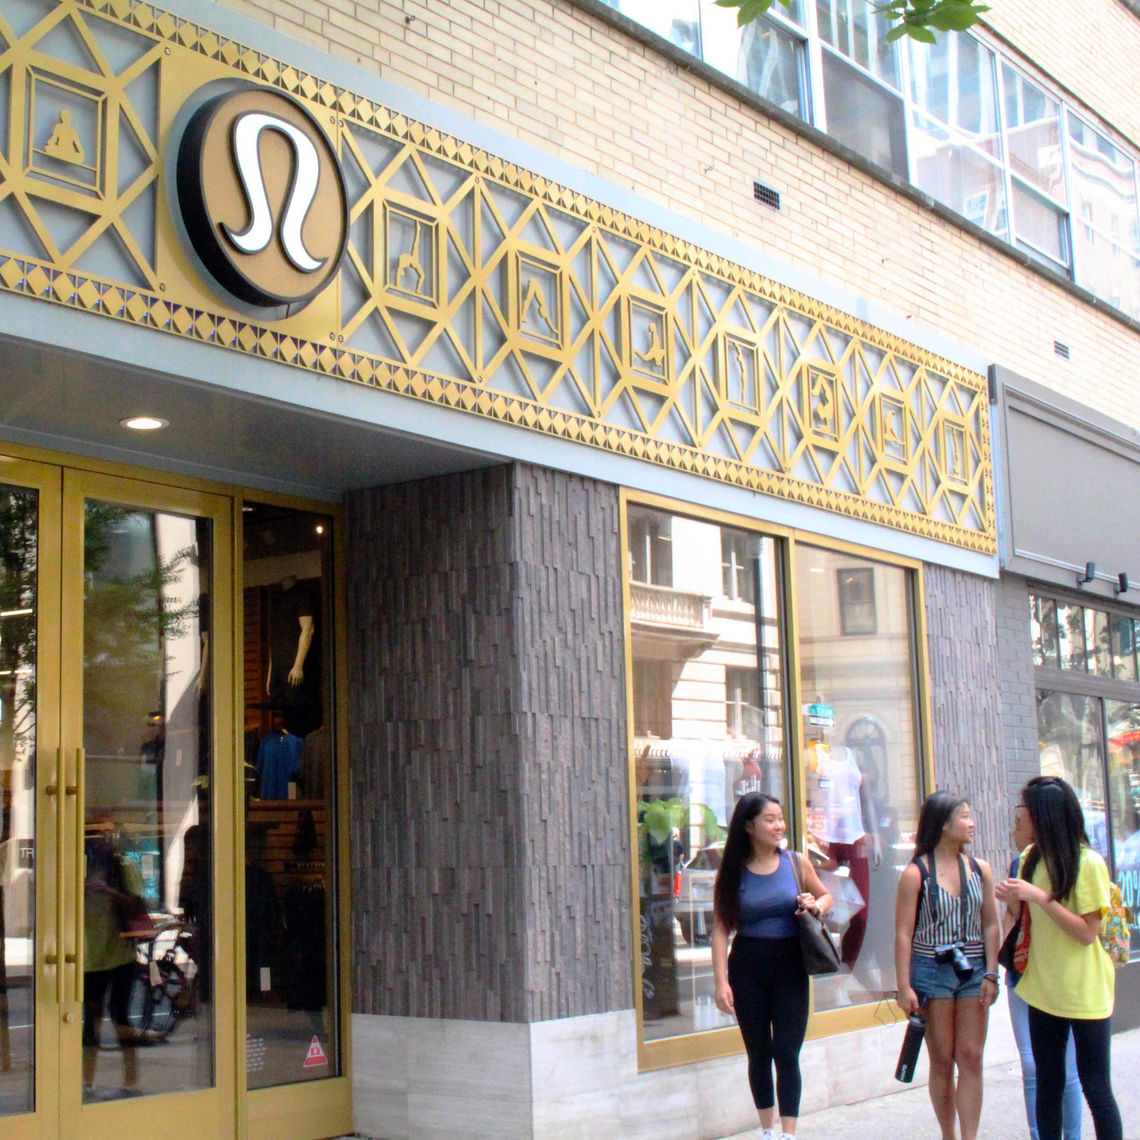 Lululemon To Stay at The Avenue Peachtree City, Relocates to